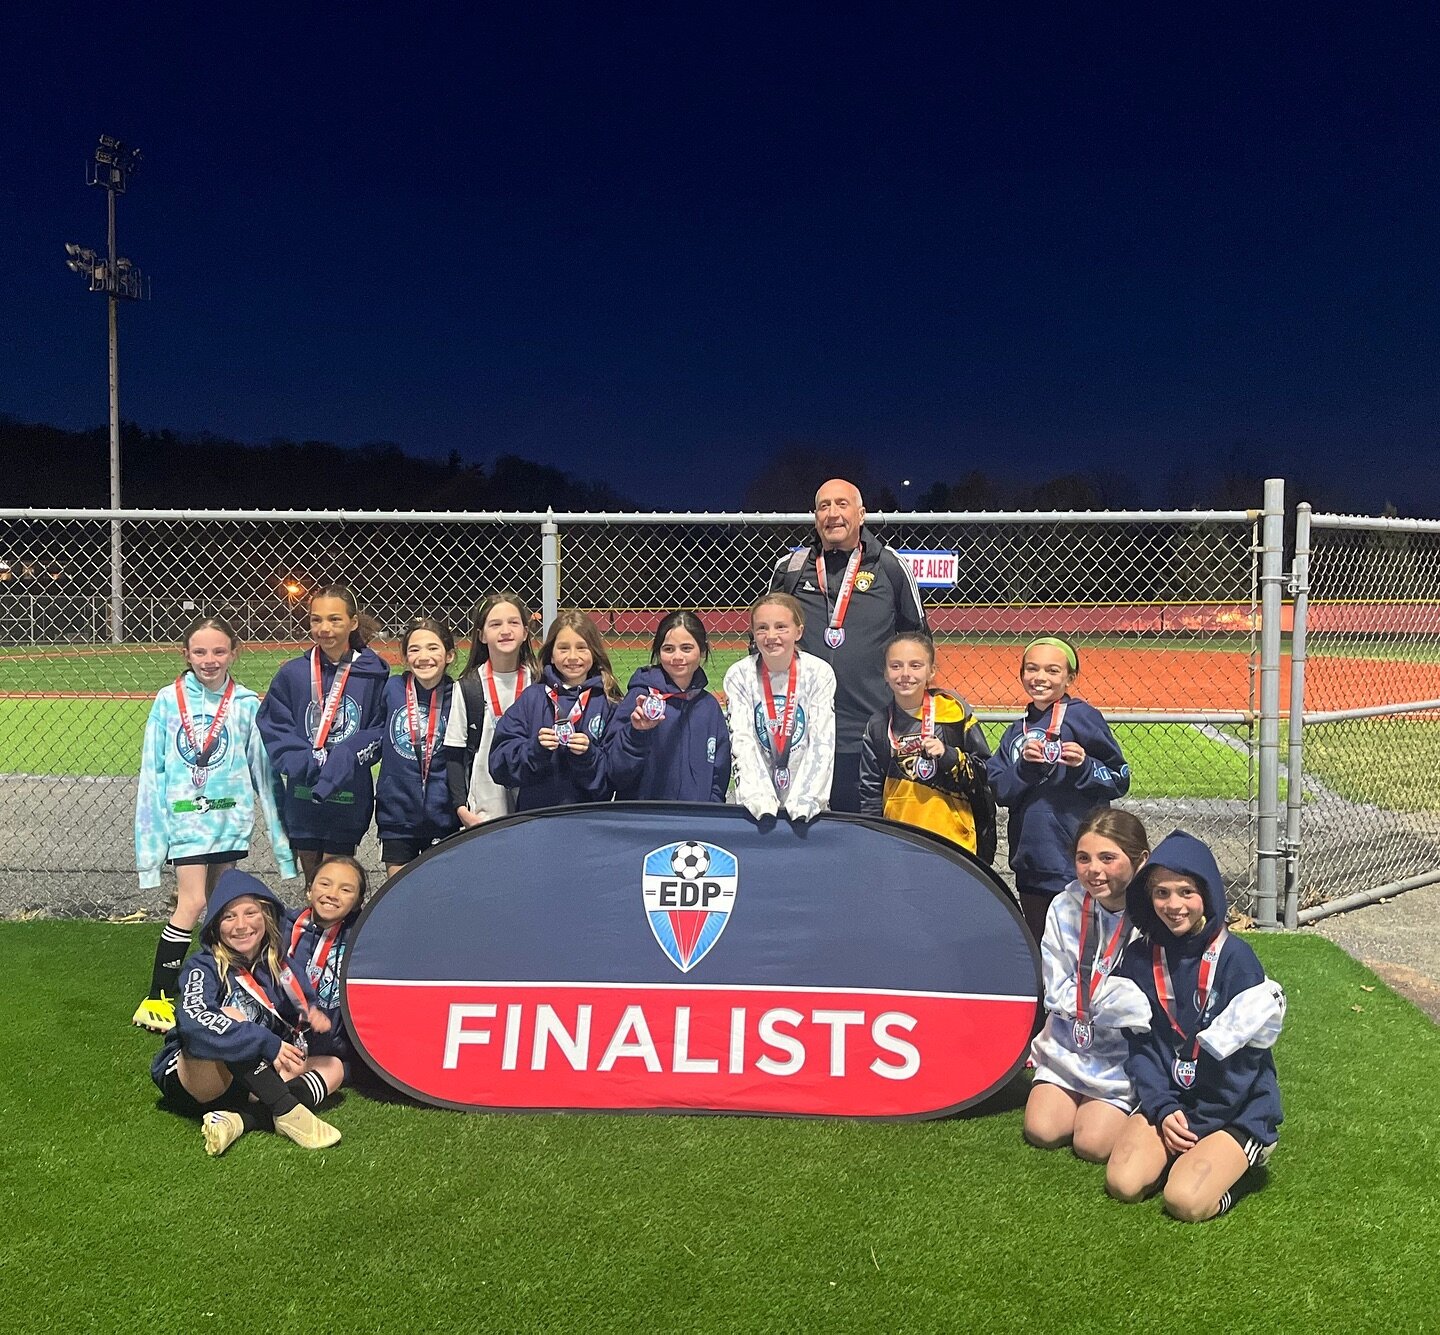 Congratulations to the GU10 Commack Crush on their 2nd place finish at the EDP Spring Kickoff in Pennsylvania. The girls competed in the highest bracket for their age group. Way to go, girls! 👏🏼⚽️🥈 #CommackSoccer #EDPSoccer #CommackSoccerLeague